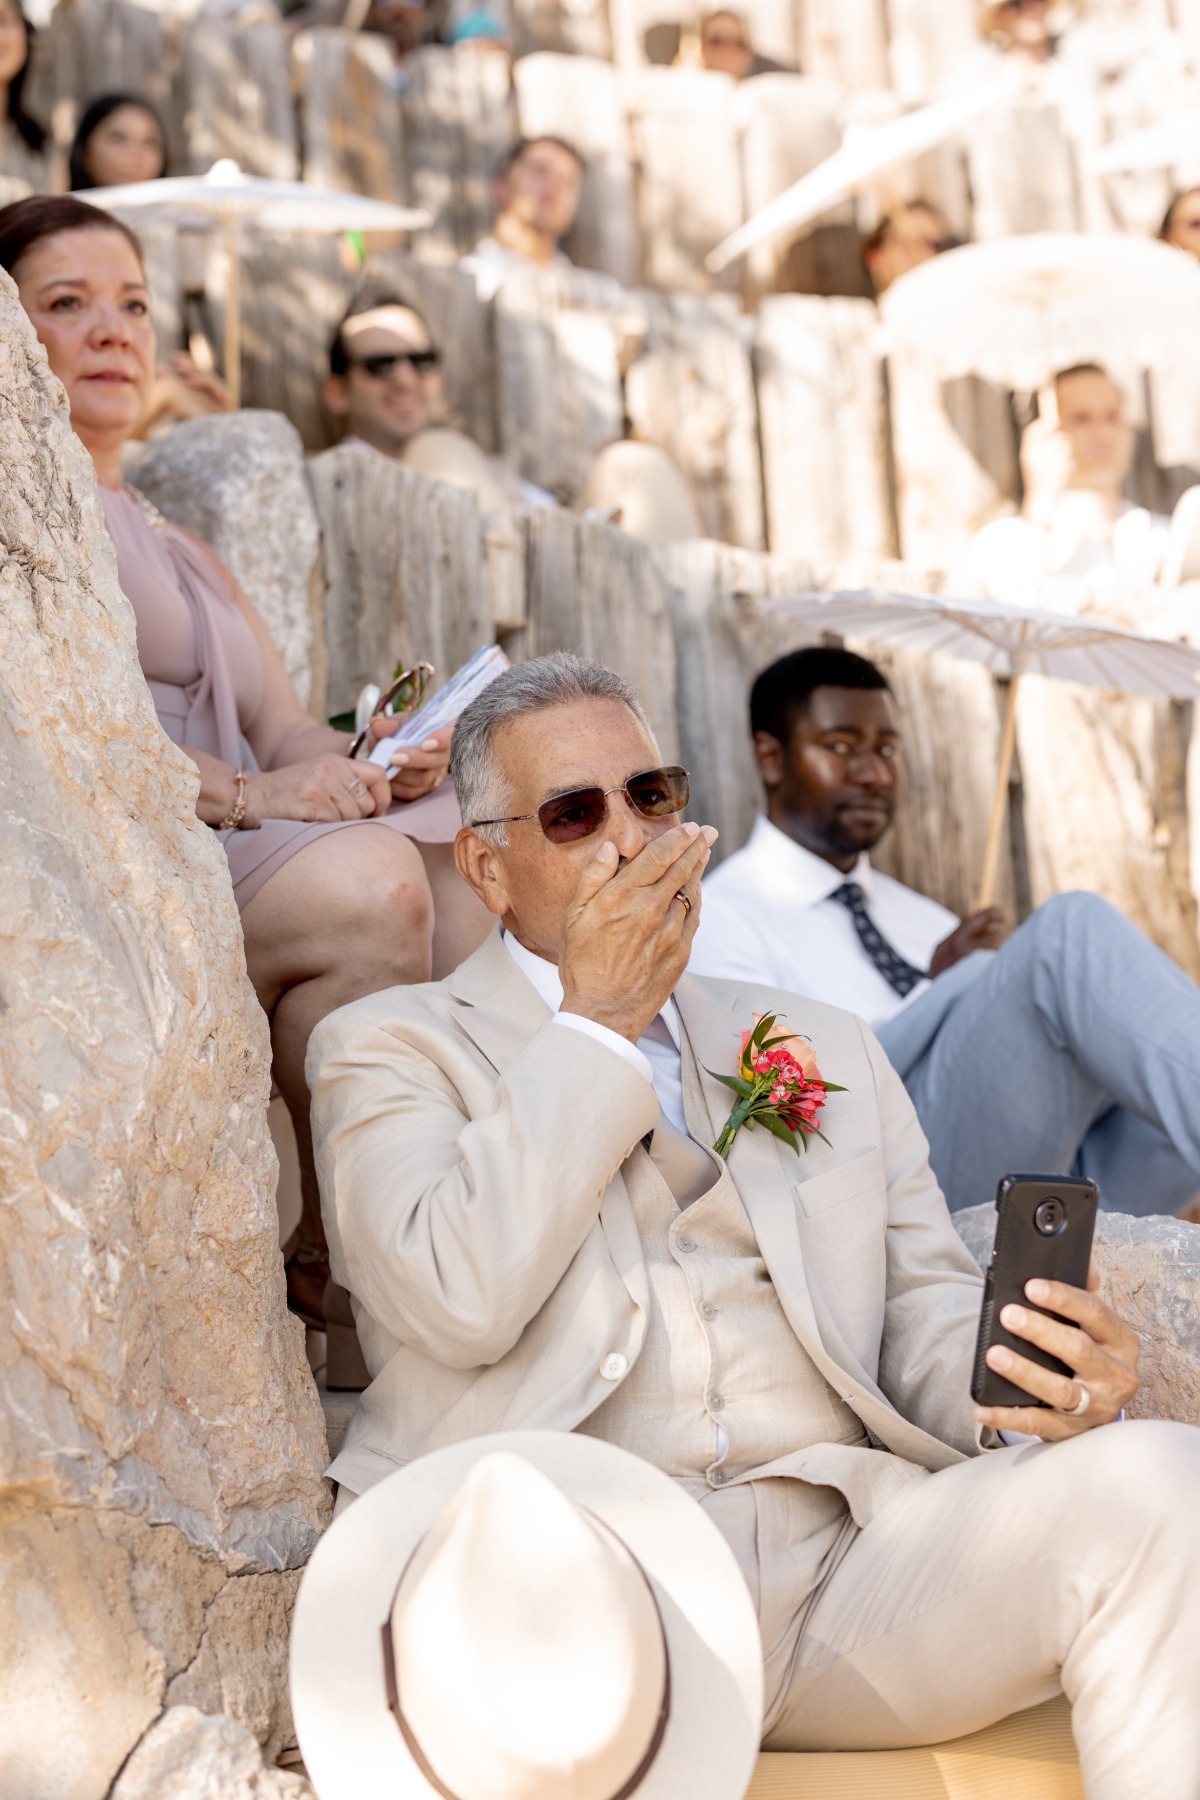 Father of the groom watching wedding ceremony in Ibiza